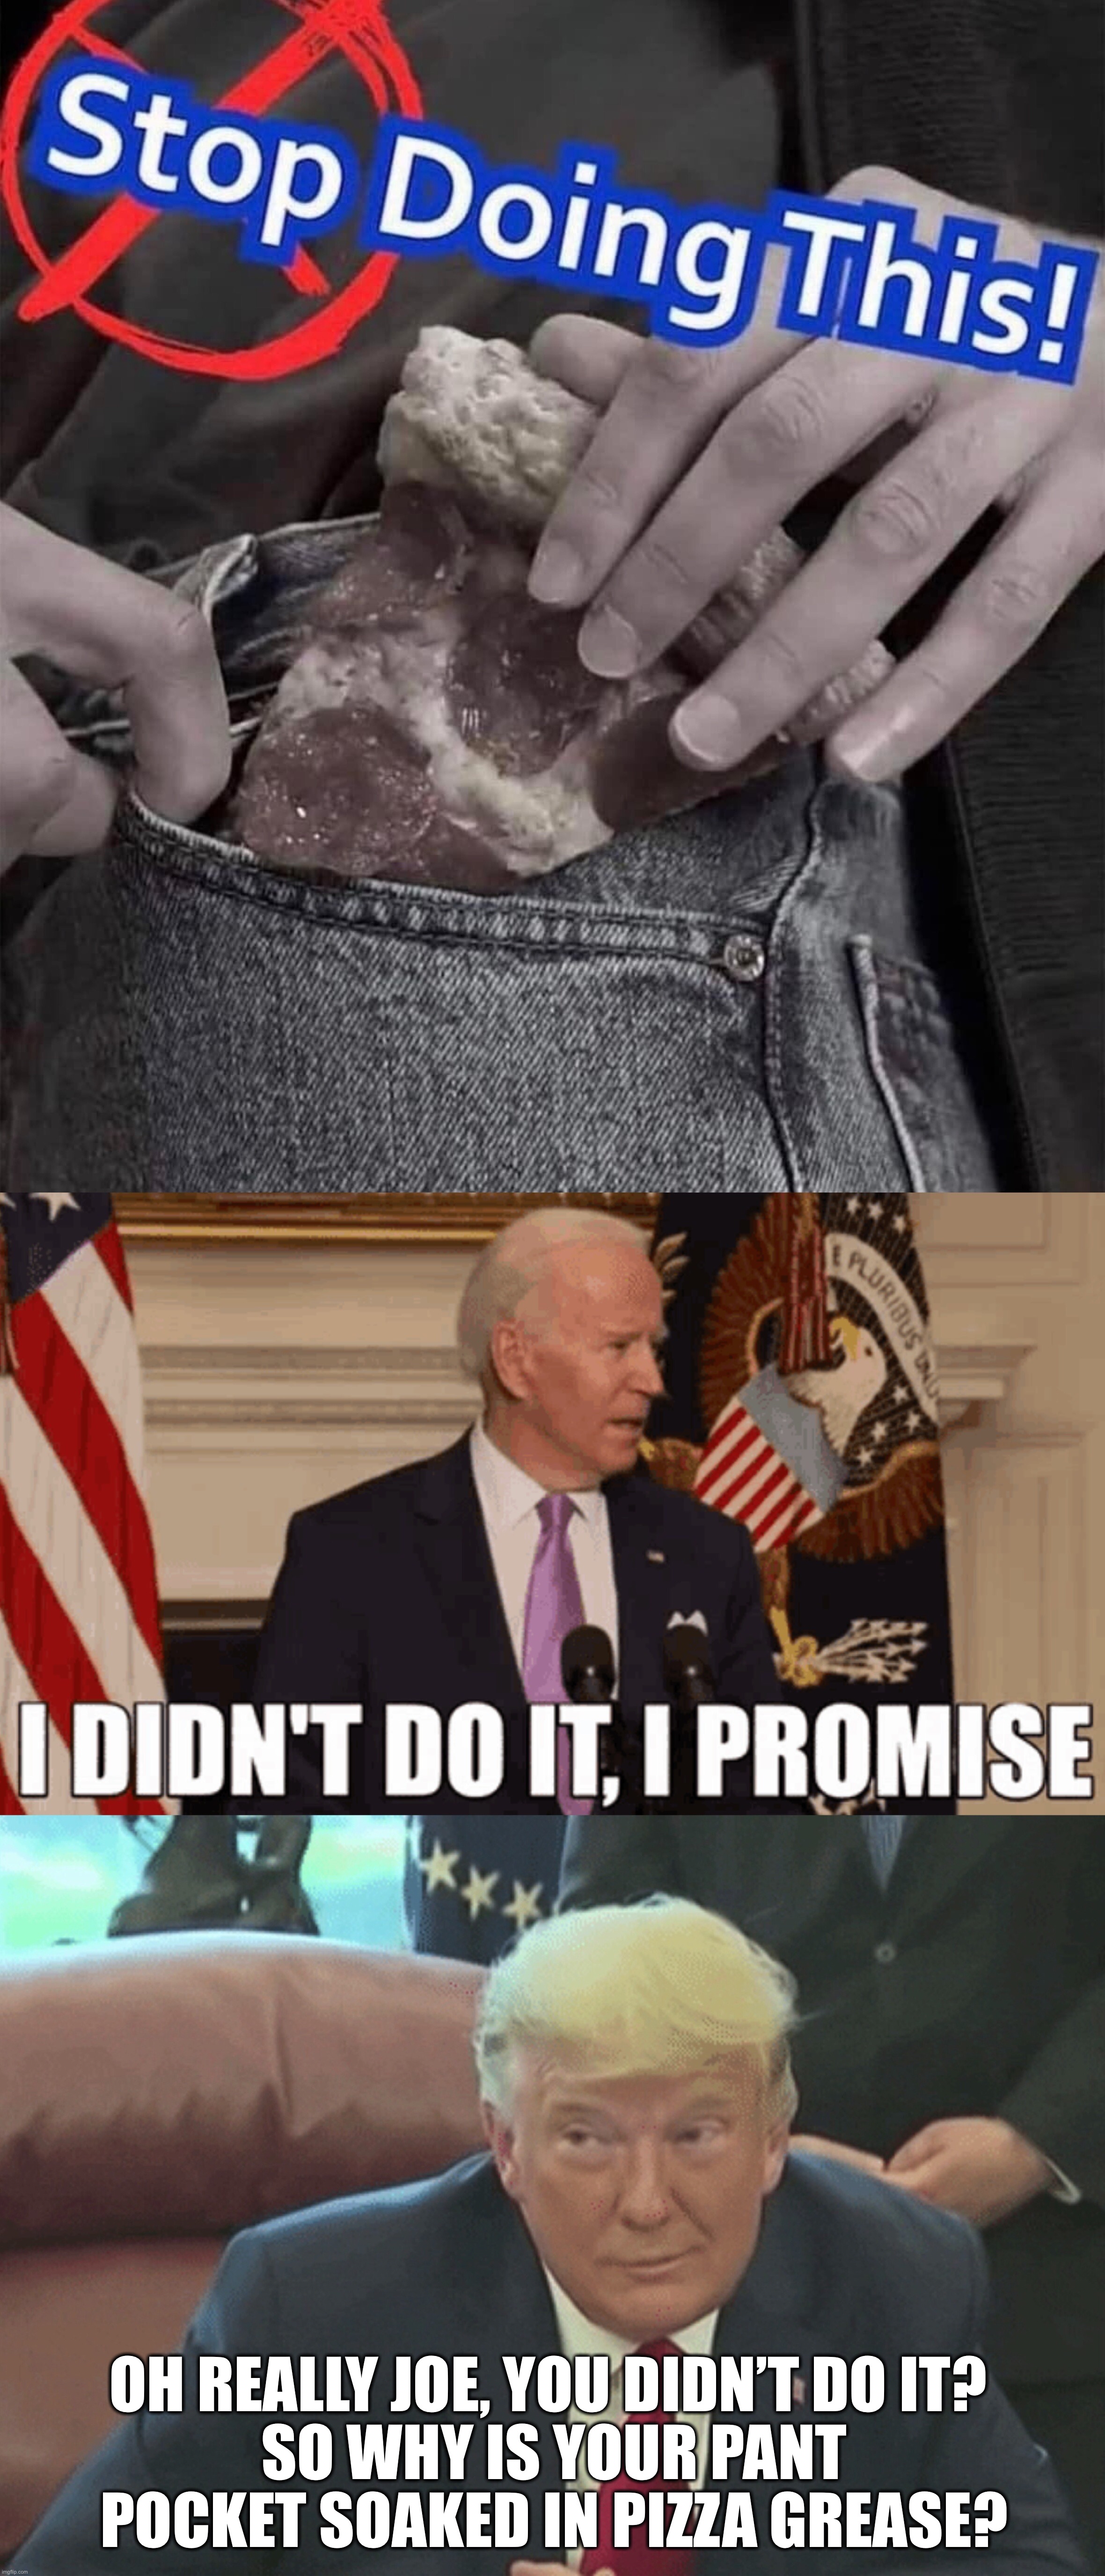  OH REALLY JOE, YOU DIDN’T DO IT? 
SO WHY IS YOUR PANT POCKET SOAKED IN PIZZA GREASE? | image tagged in joe biden,donald trump,politics,memes,funny memes,political meme | made w/ Imgflip meme maker